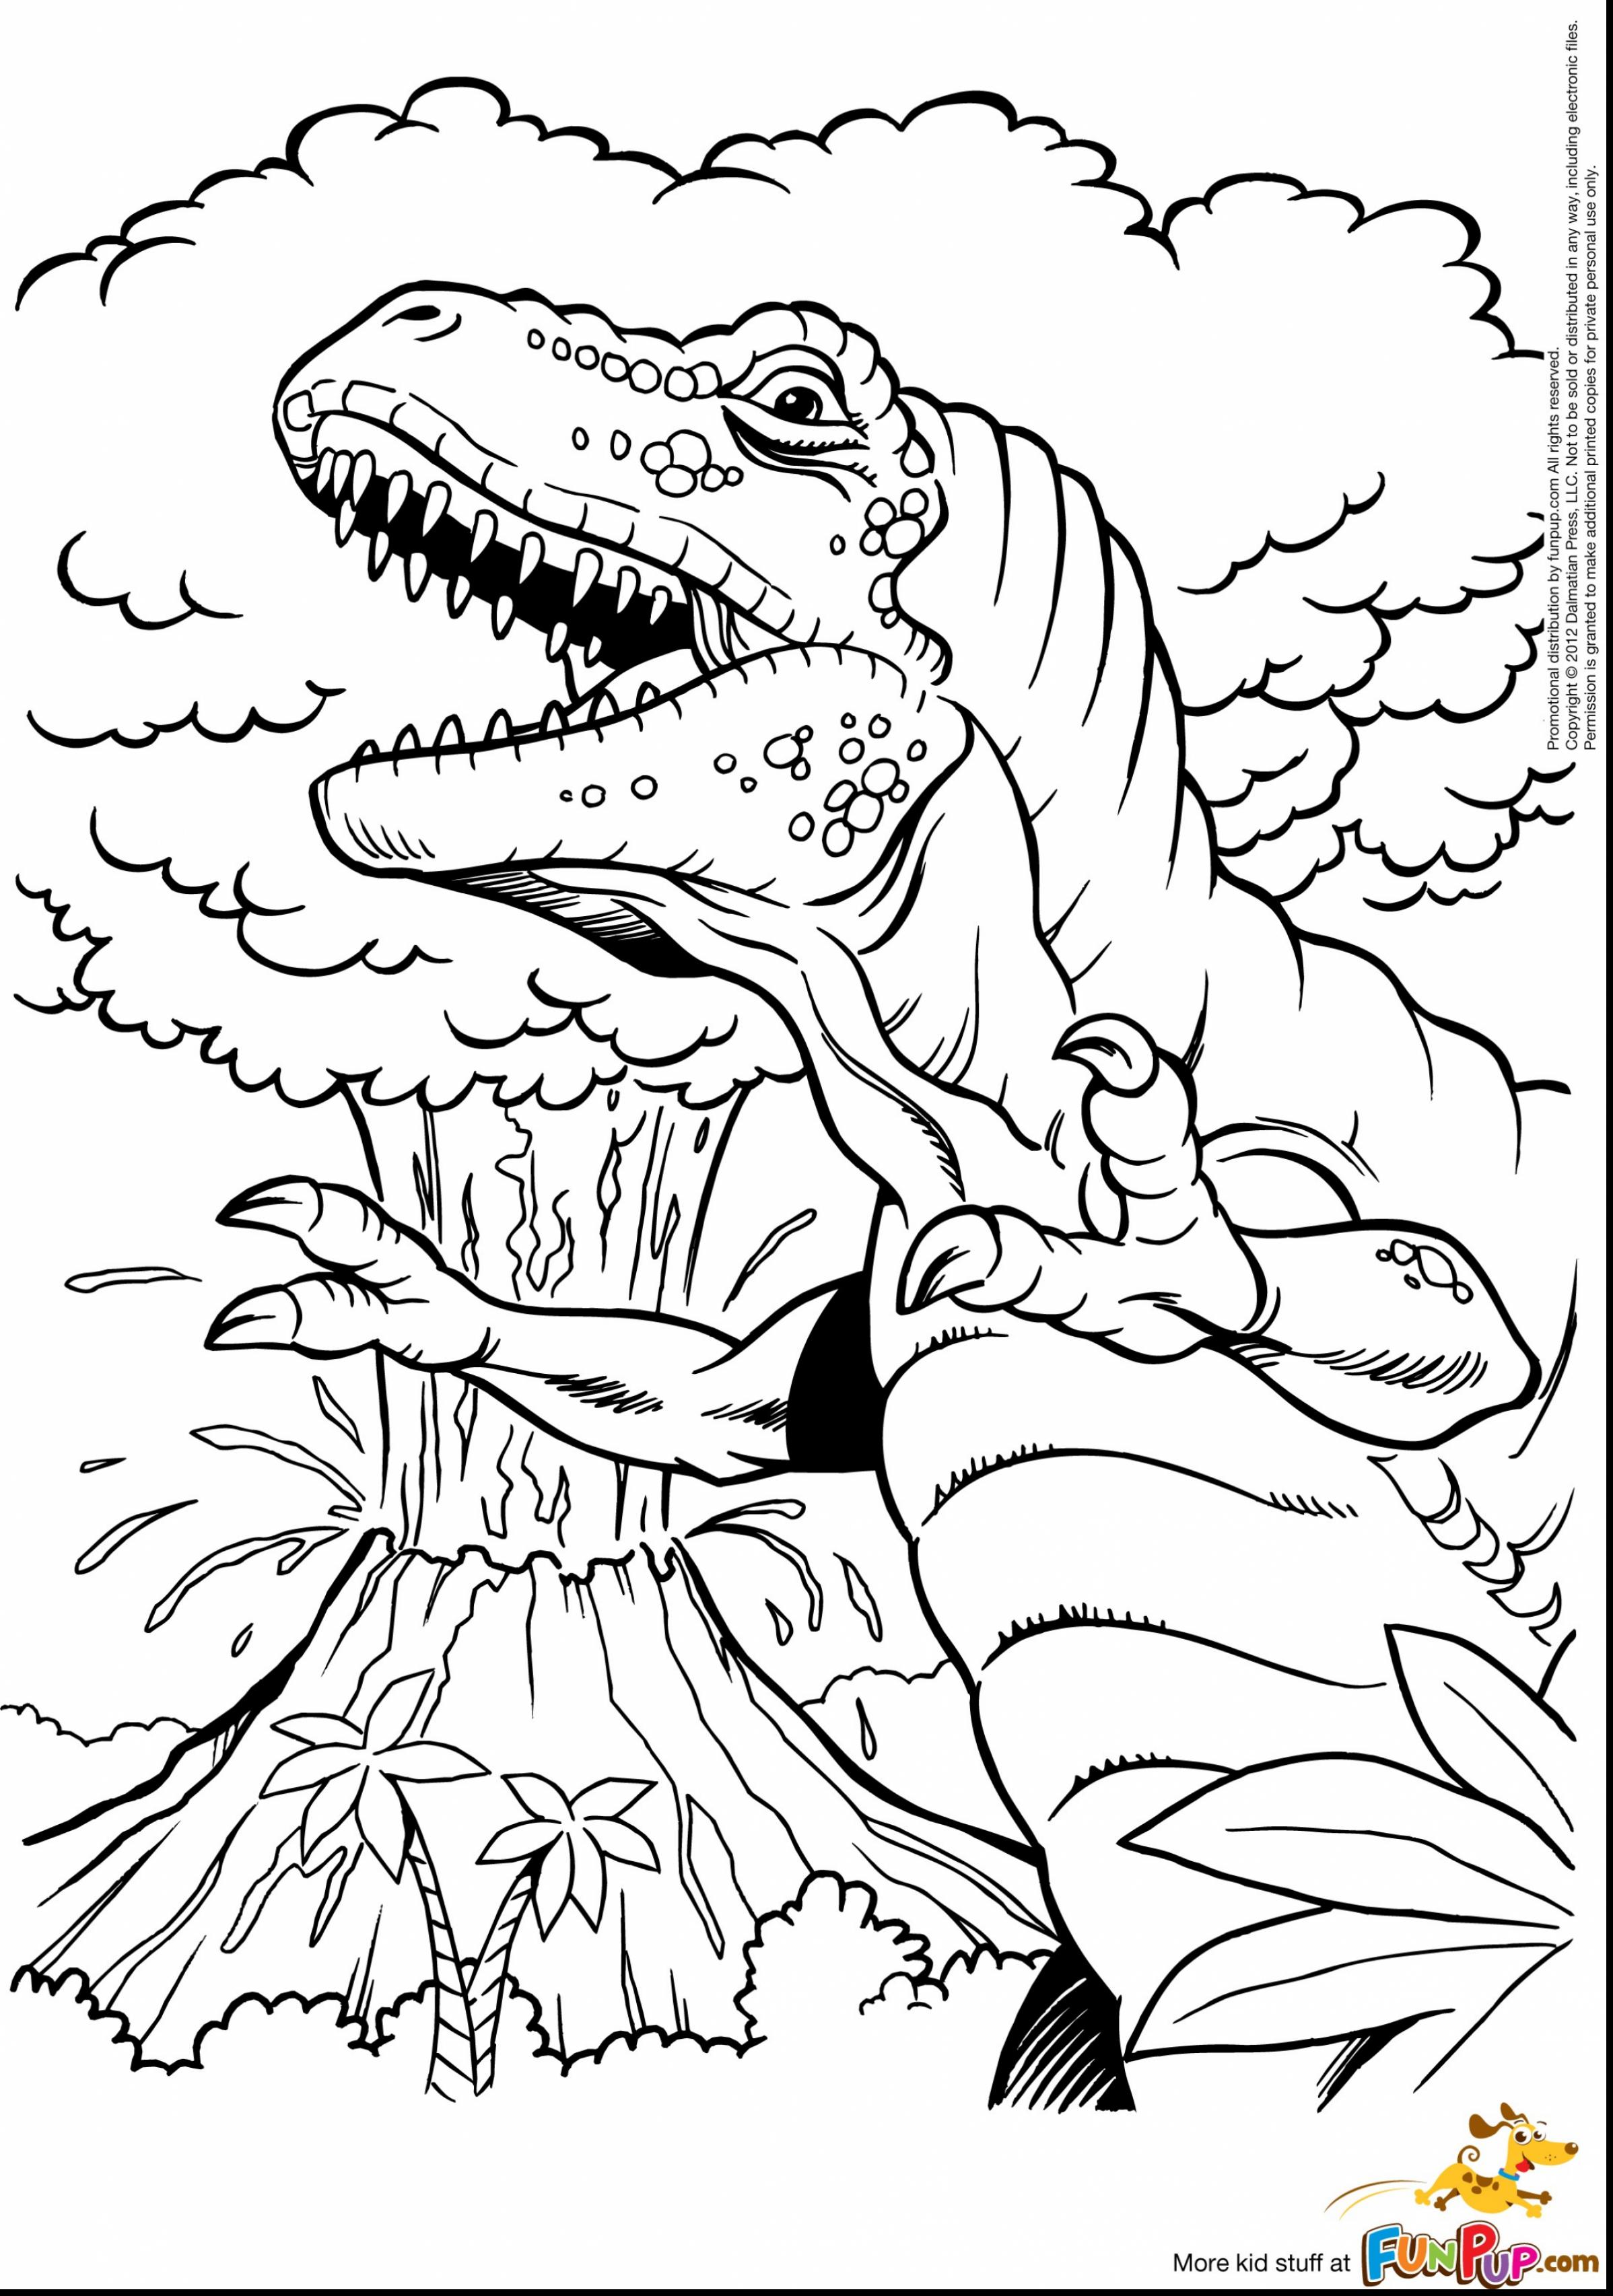 T Rex Coloring Page at Free printable colorings